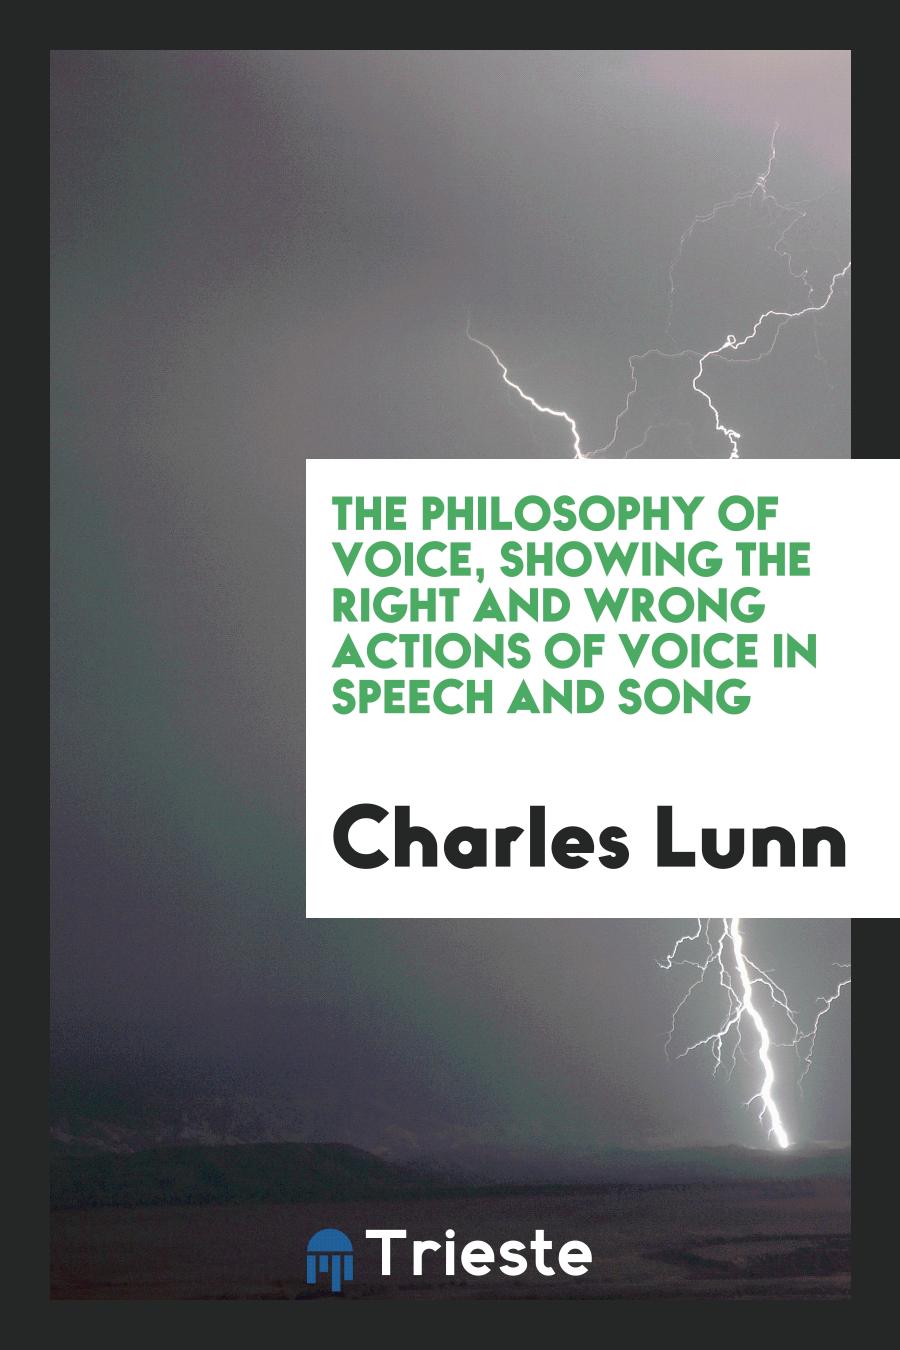 The philosophy of voice, showing the right and wrong actions of voice in speech and song